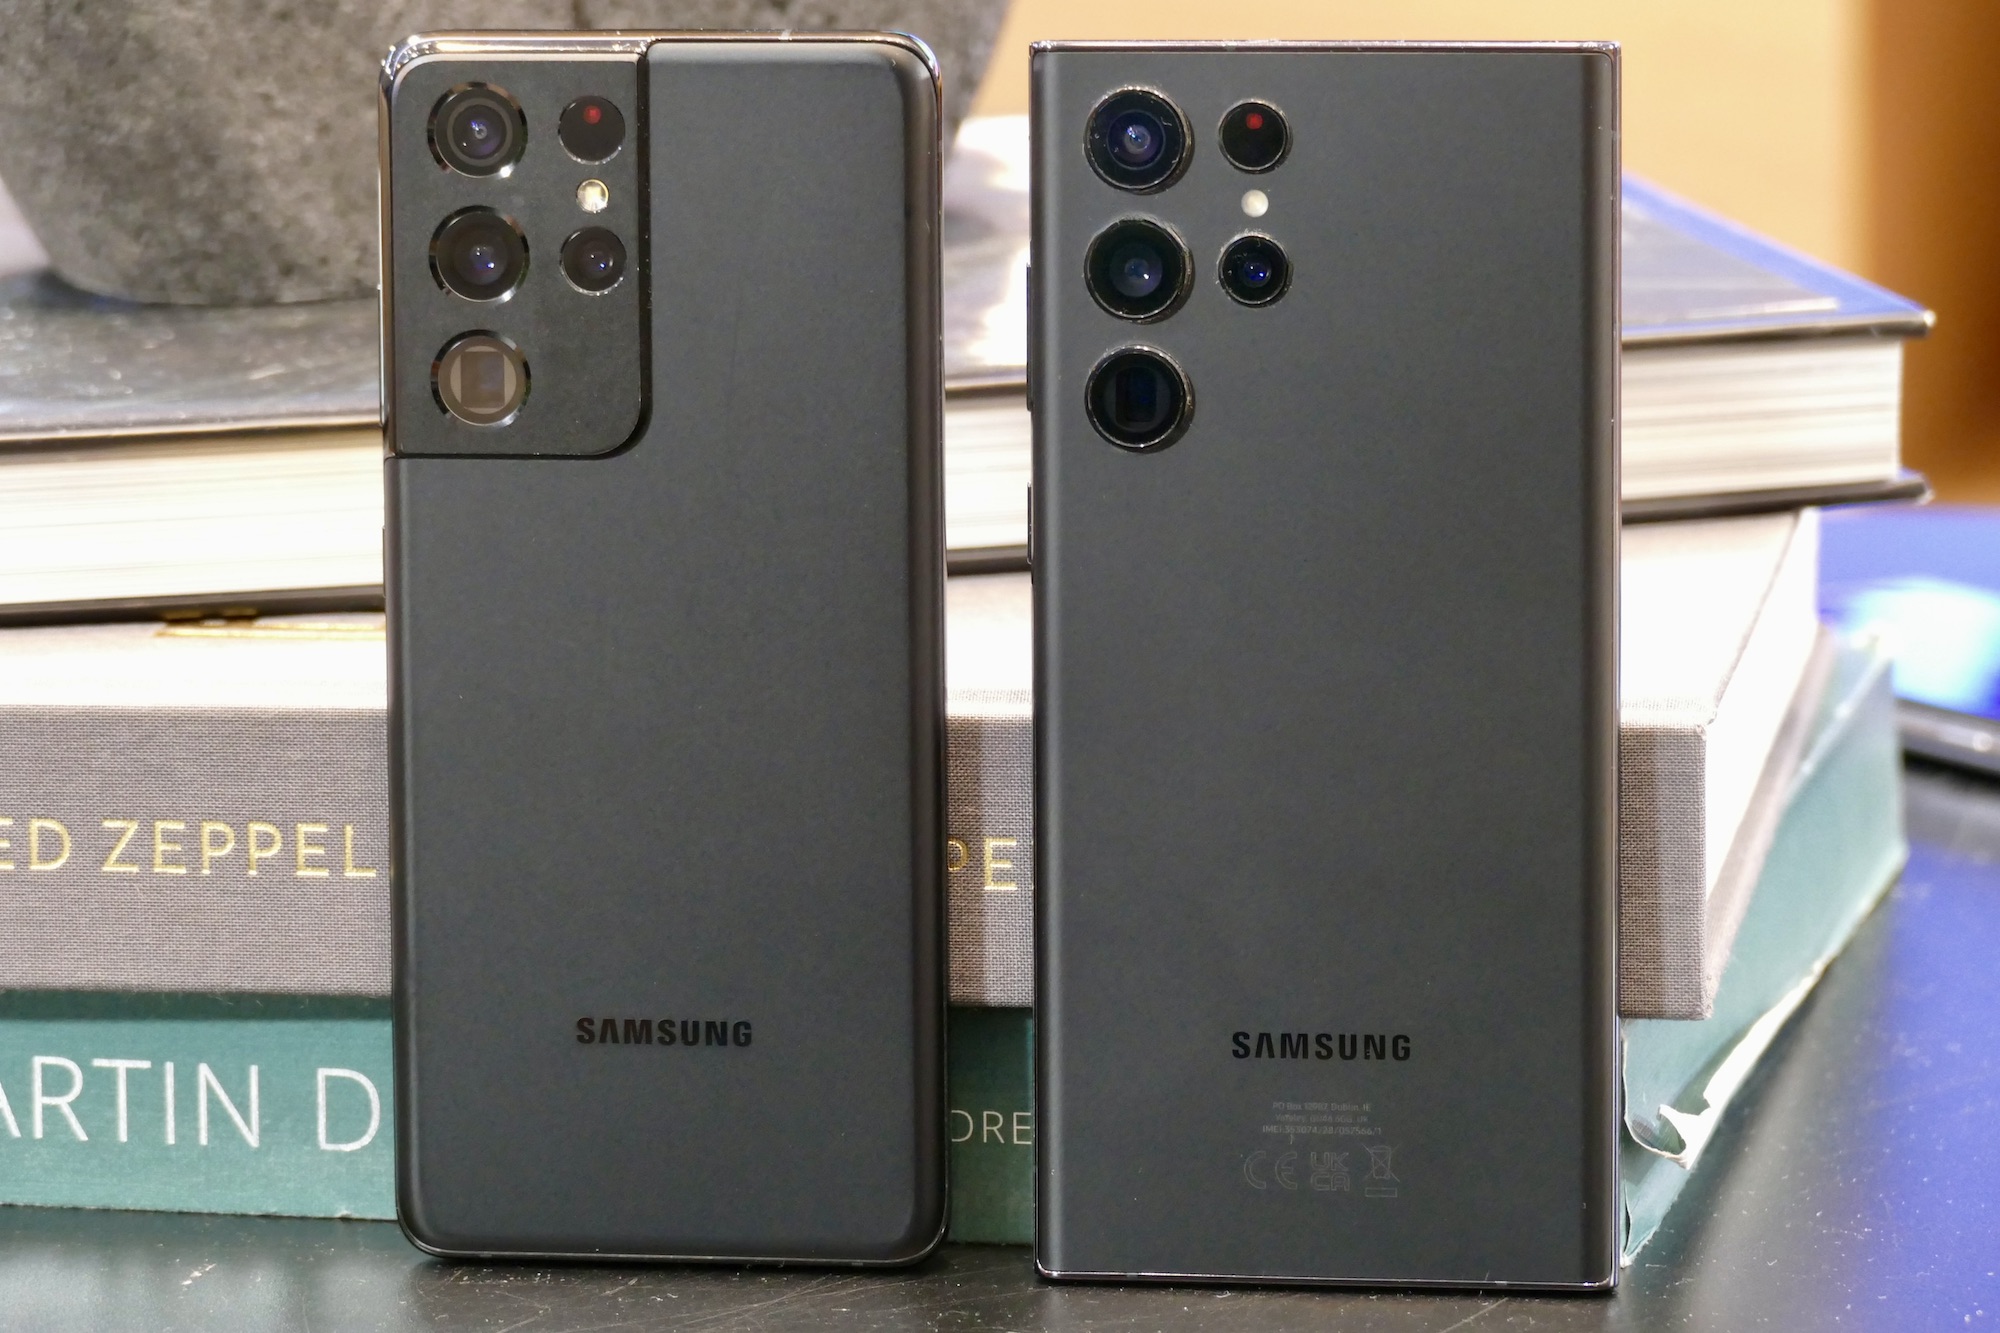 Compare Samsung Galaxy S22 Ultra vs S21 Ultra: which is better?